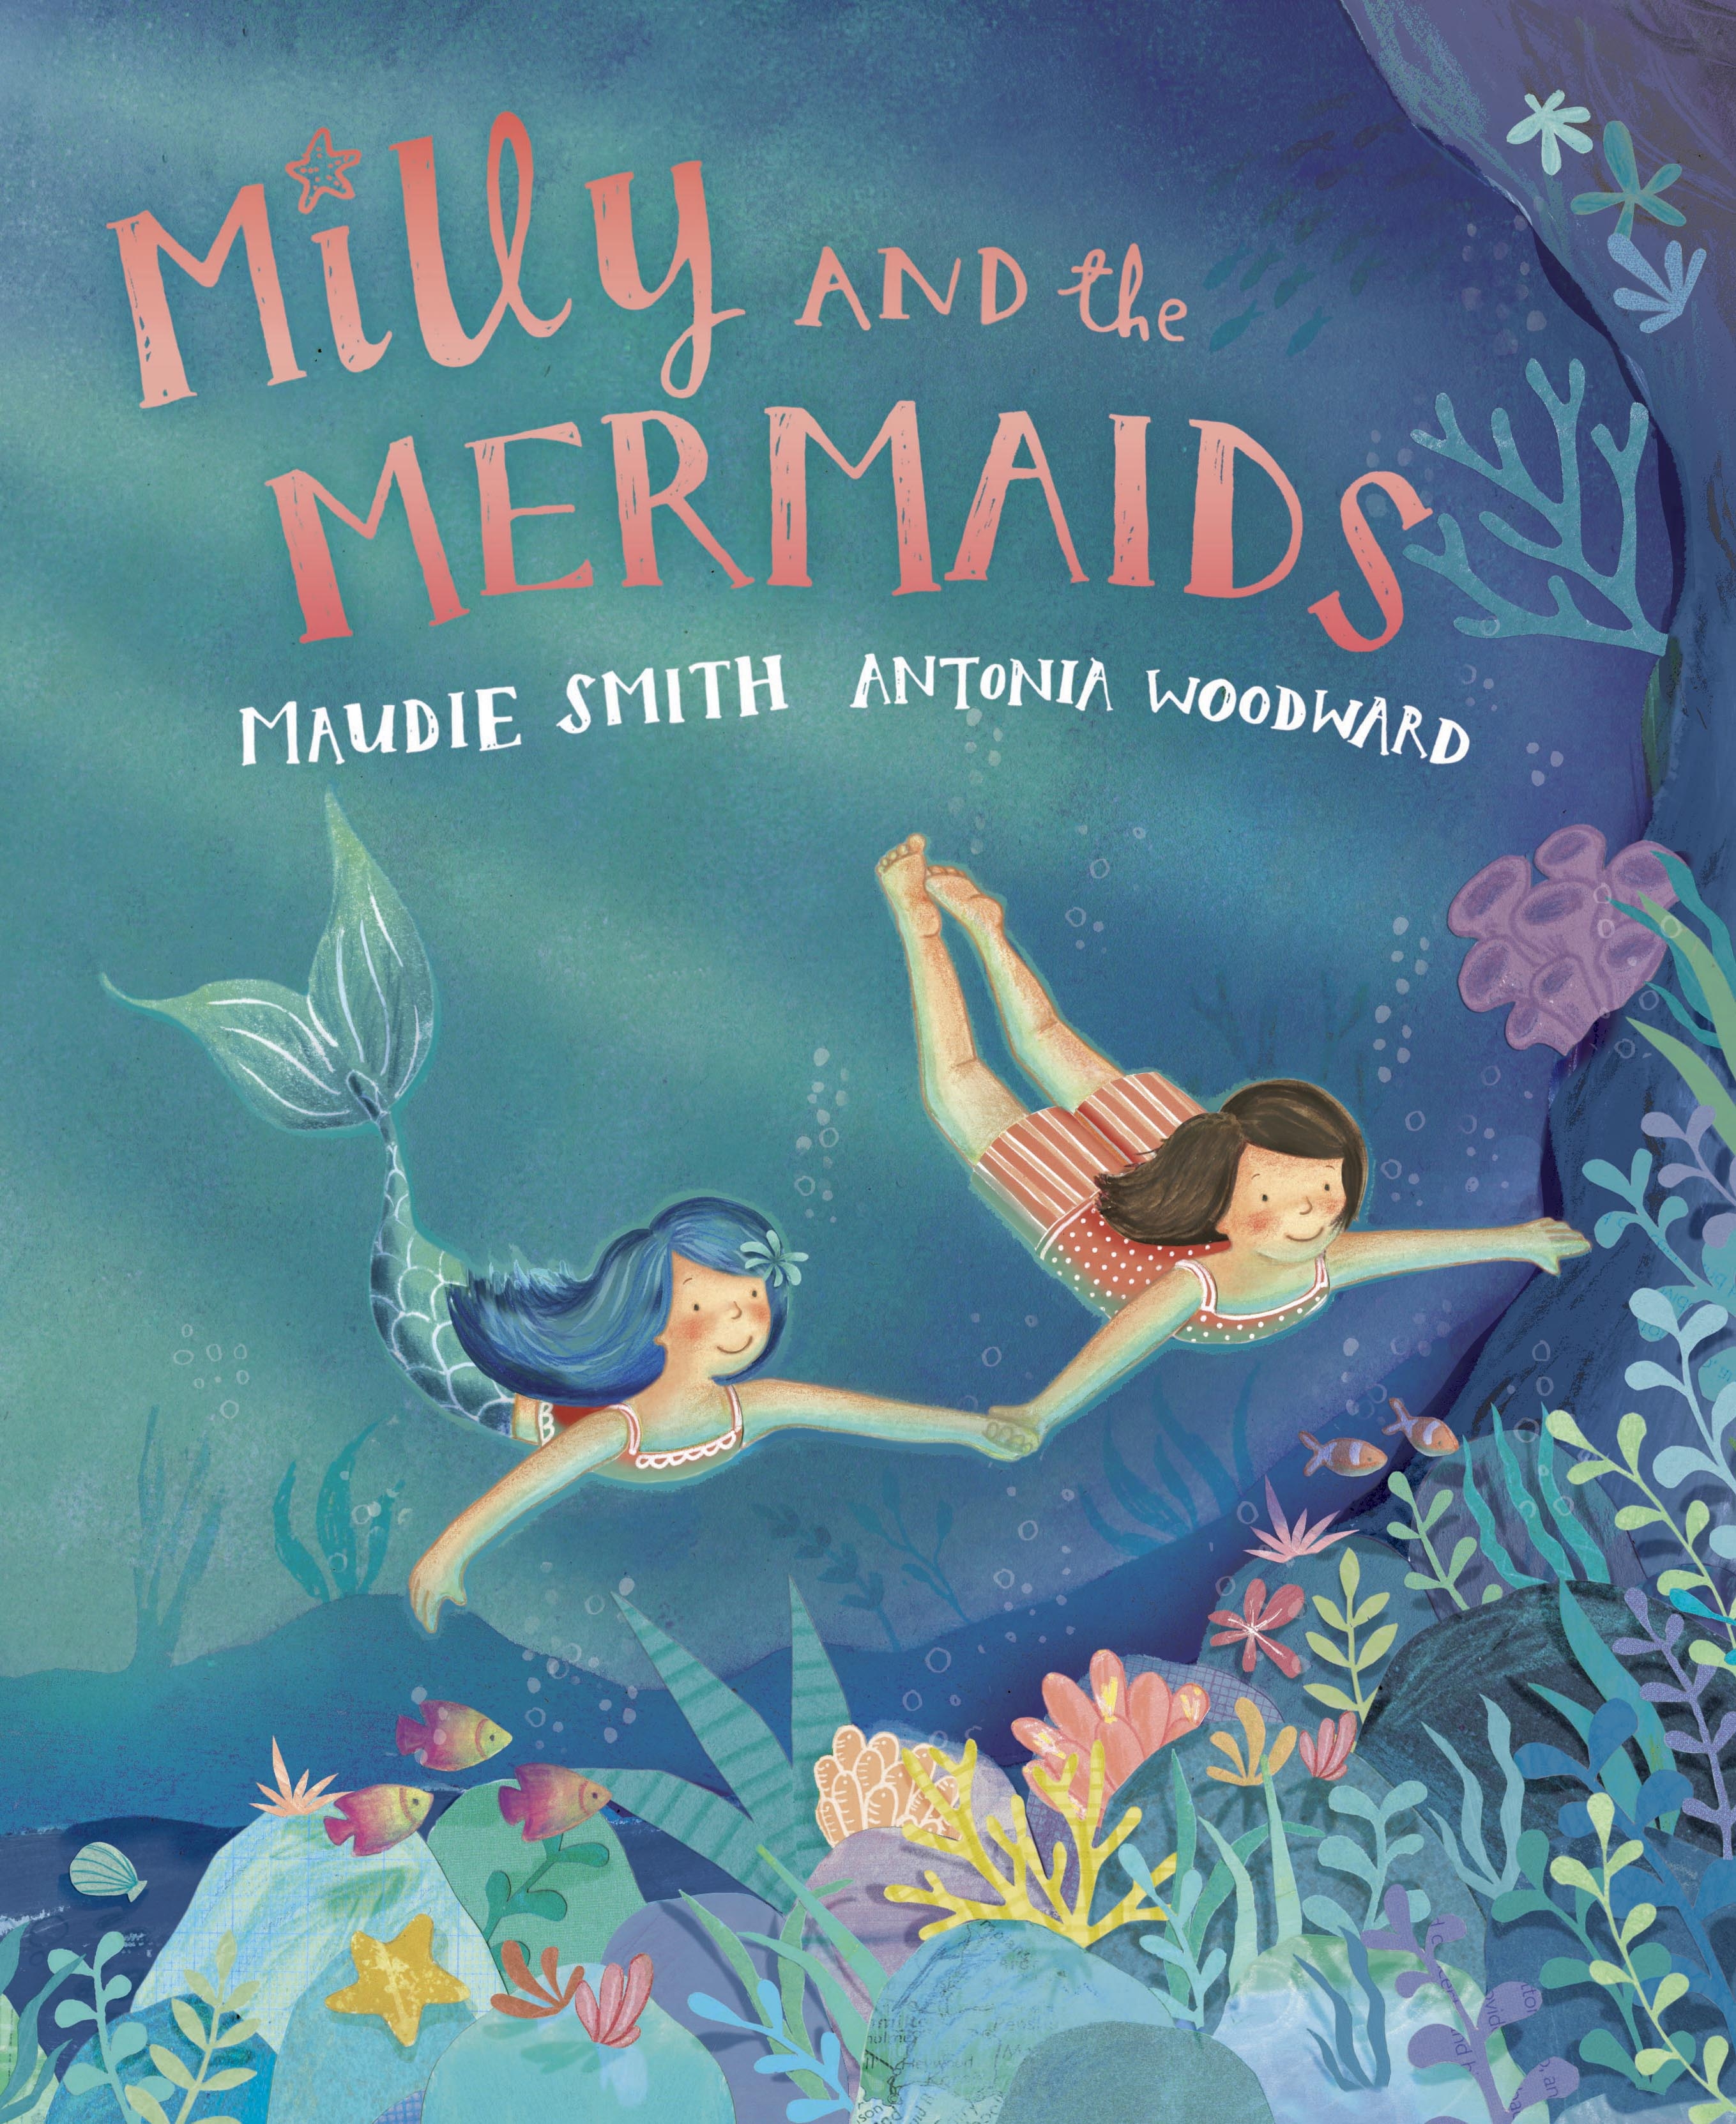 Milly and the Mermaids by Maudie Smith | Hachette Childrens UK